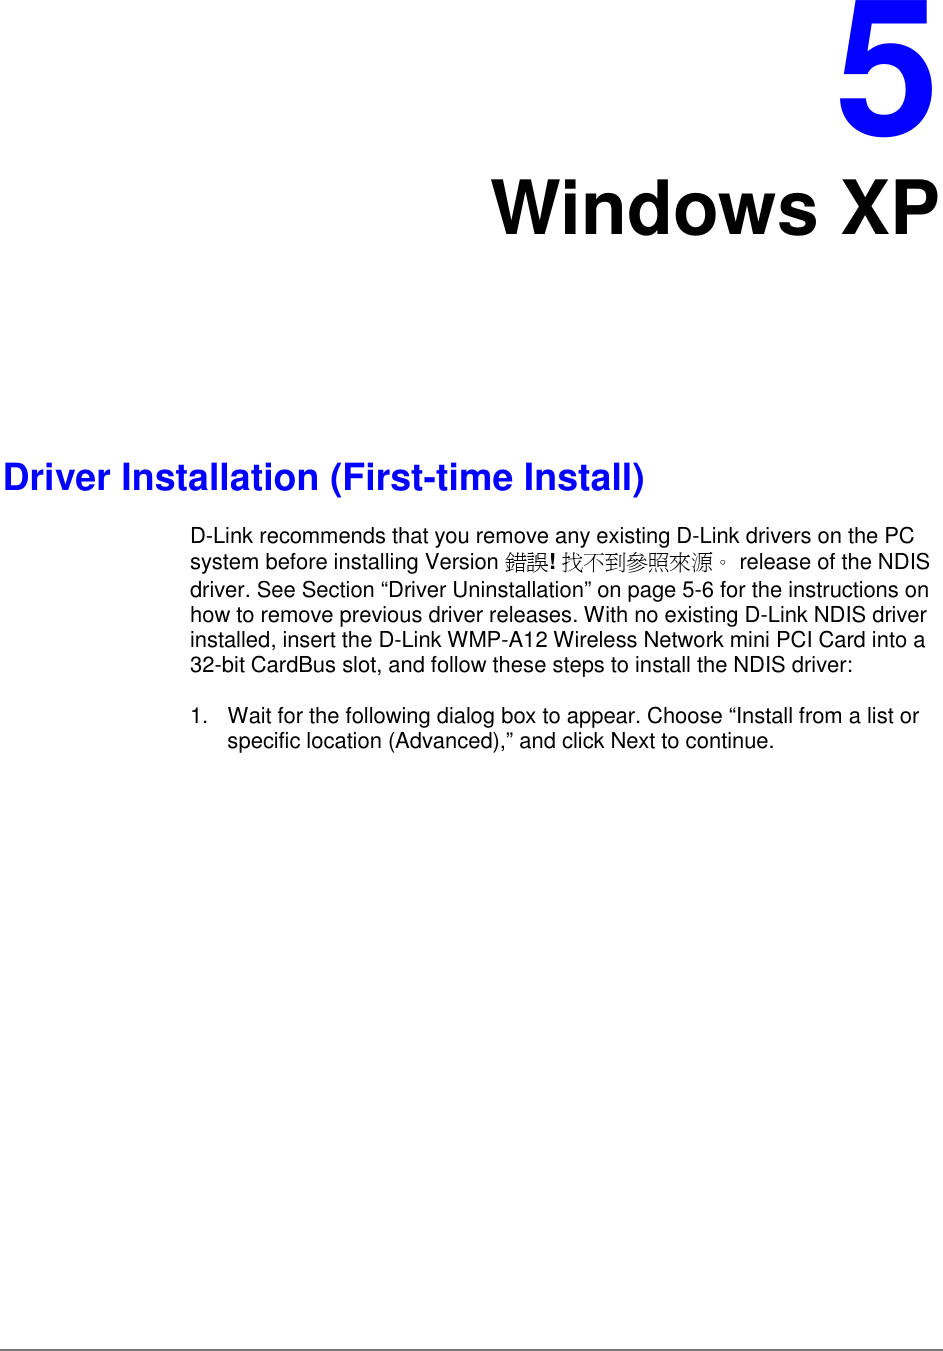 5Windows XPDriver Installation (First-time Install)D-Link recommends that you remove any existing D-Link drivers on the PCsystem before installing Version 錯誤! 找不到參照來源。 release of the NDISdriver. See Section “Driver Uninstallation” on page 5-6 for the instructions onhow to remove previous driver releases. With no existing D-Link NDIS driverinstalled, insert the D-Link WMP-A12 Wireless Network mini PCI Card into a32-bit CardBus slot, and follow these steps to install the NDIS driver:1.  Wait for the following dialog box to appear. Choose “Install from a list orspecific location (Advanced),” and click Next to continue.